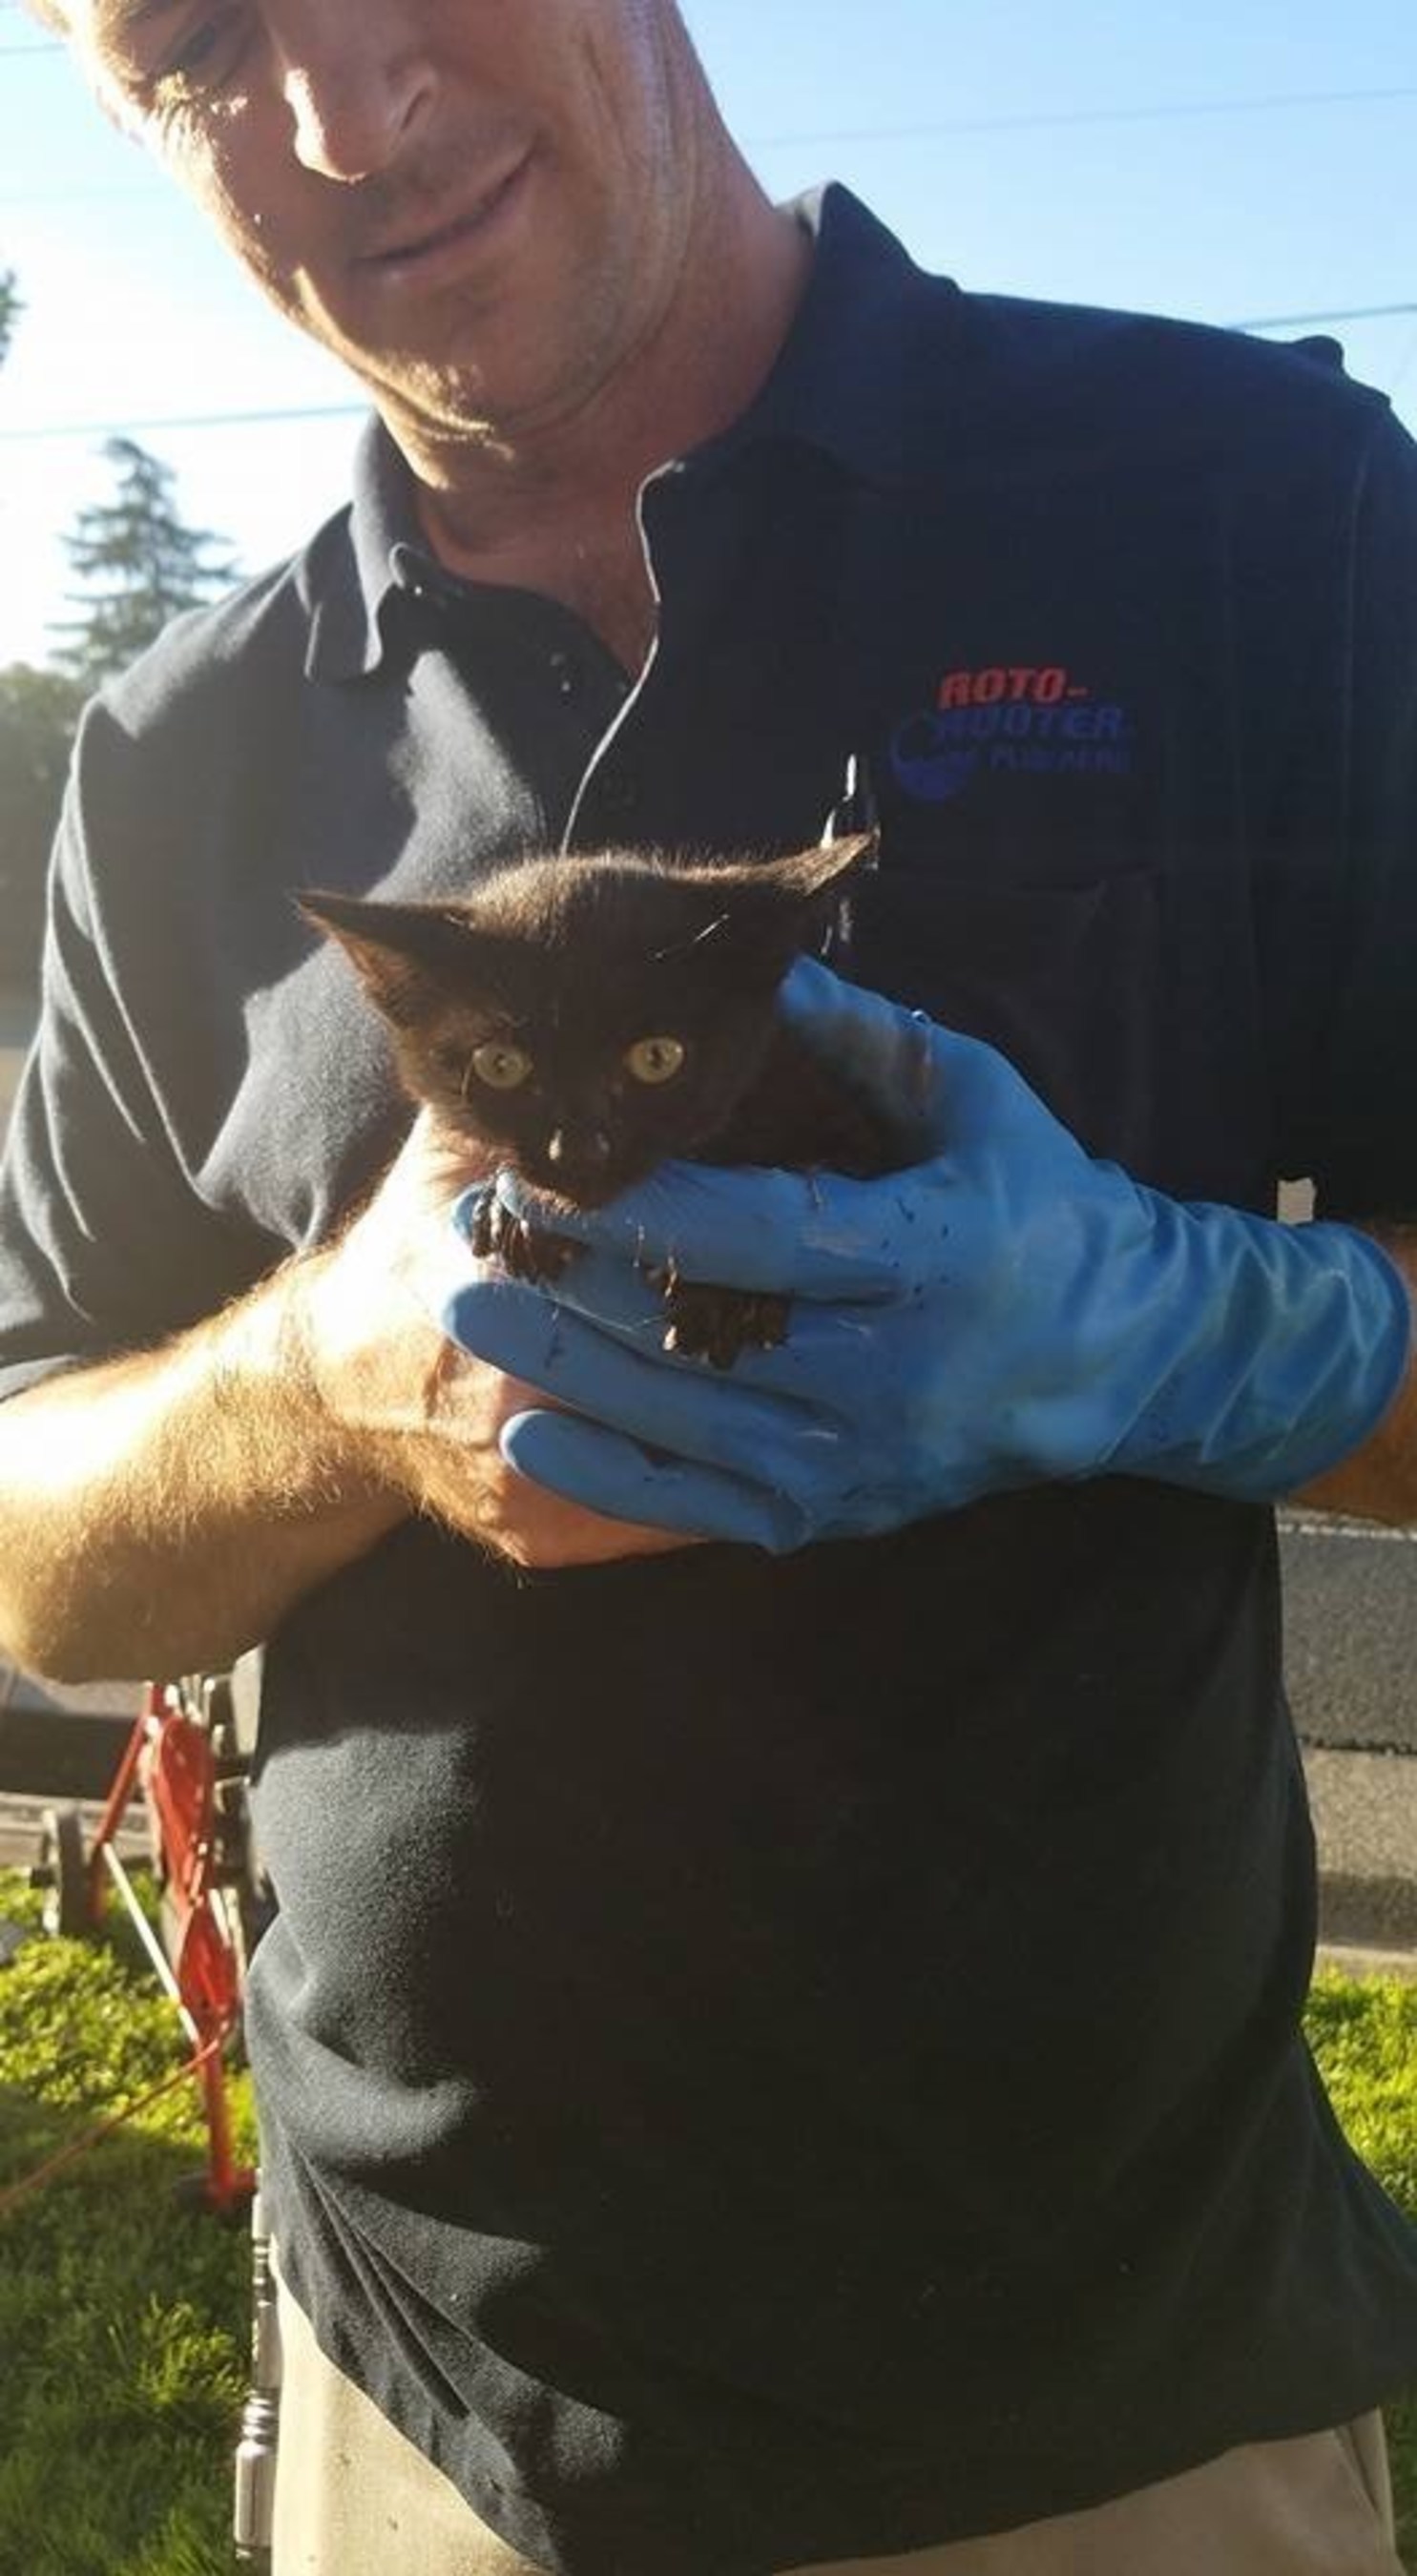 Sacramento Roto-Rooter Plumber Heroically Saves Helpless Kitten Trapped in Drain